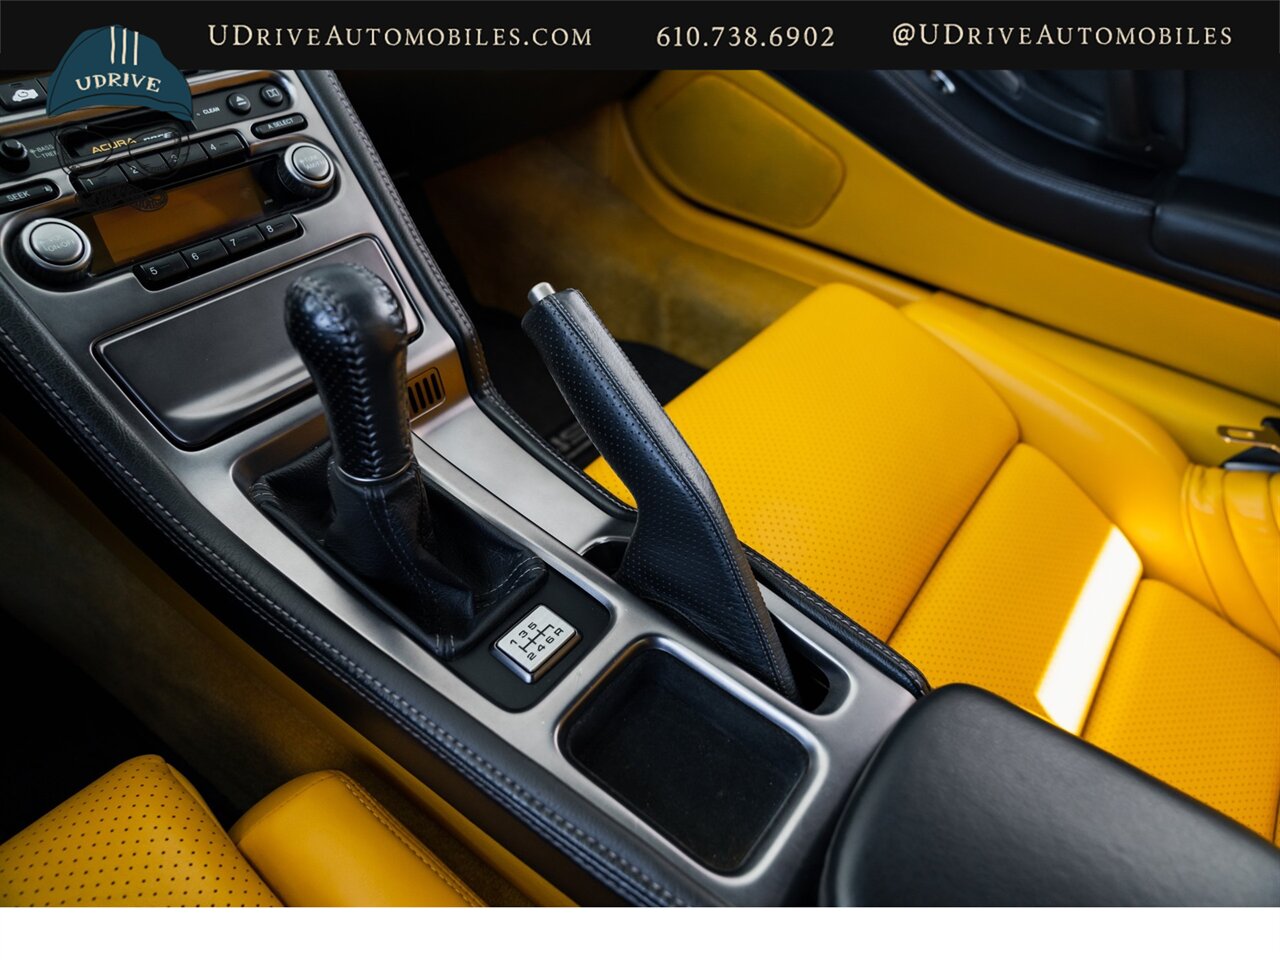 2003 Acura NSX NSX-T  Spa Yellow over Yellow Lthr 1 of 13 Produced - Photo 41 - West Chester, PA 19382